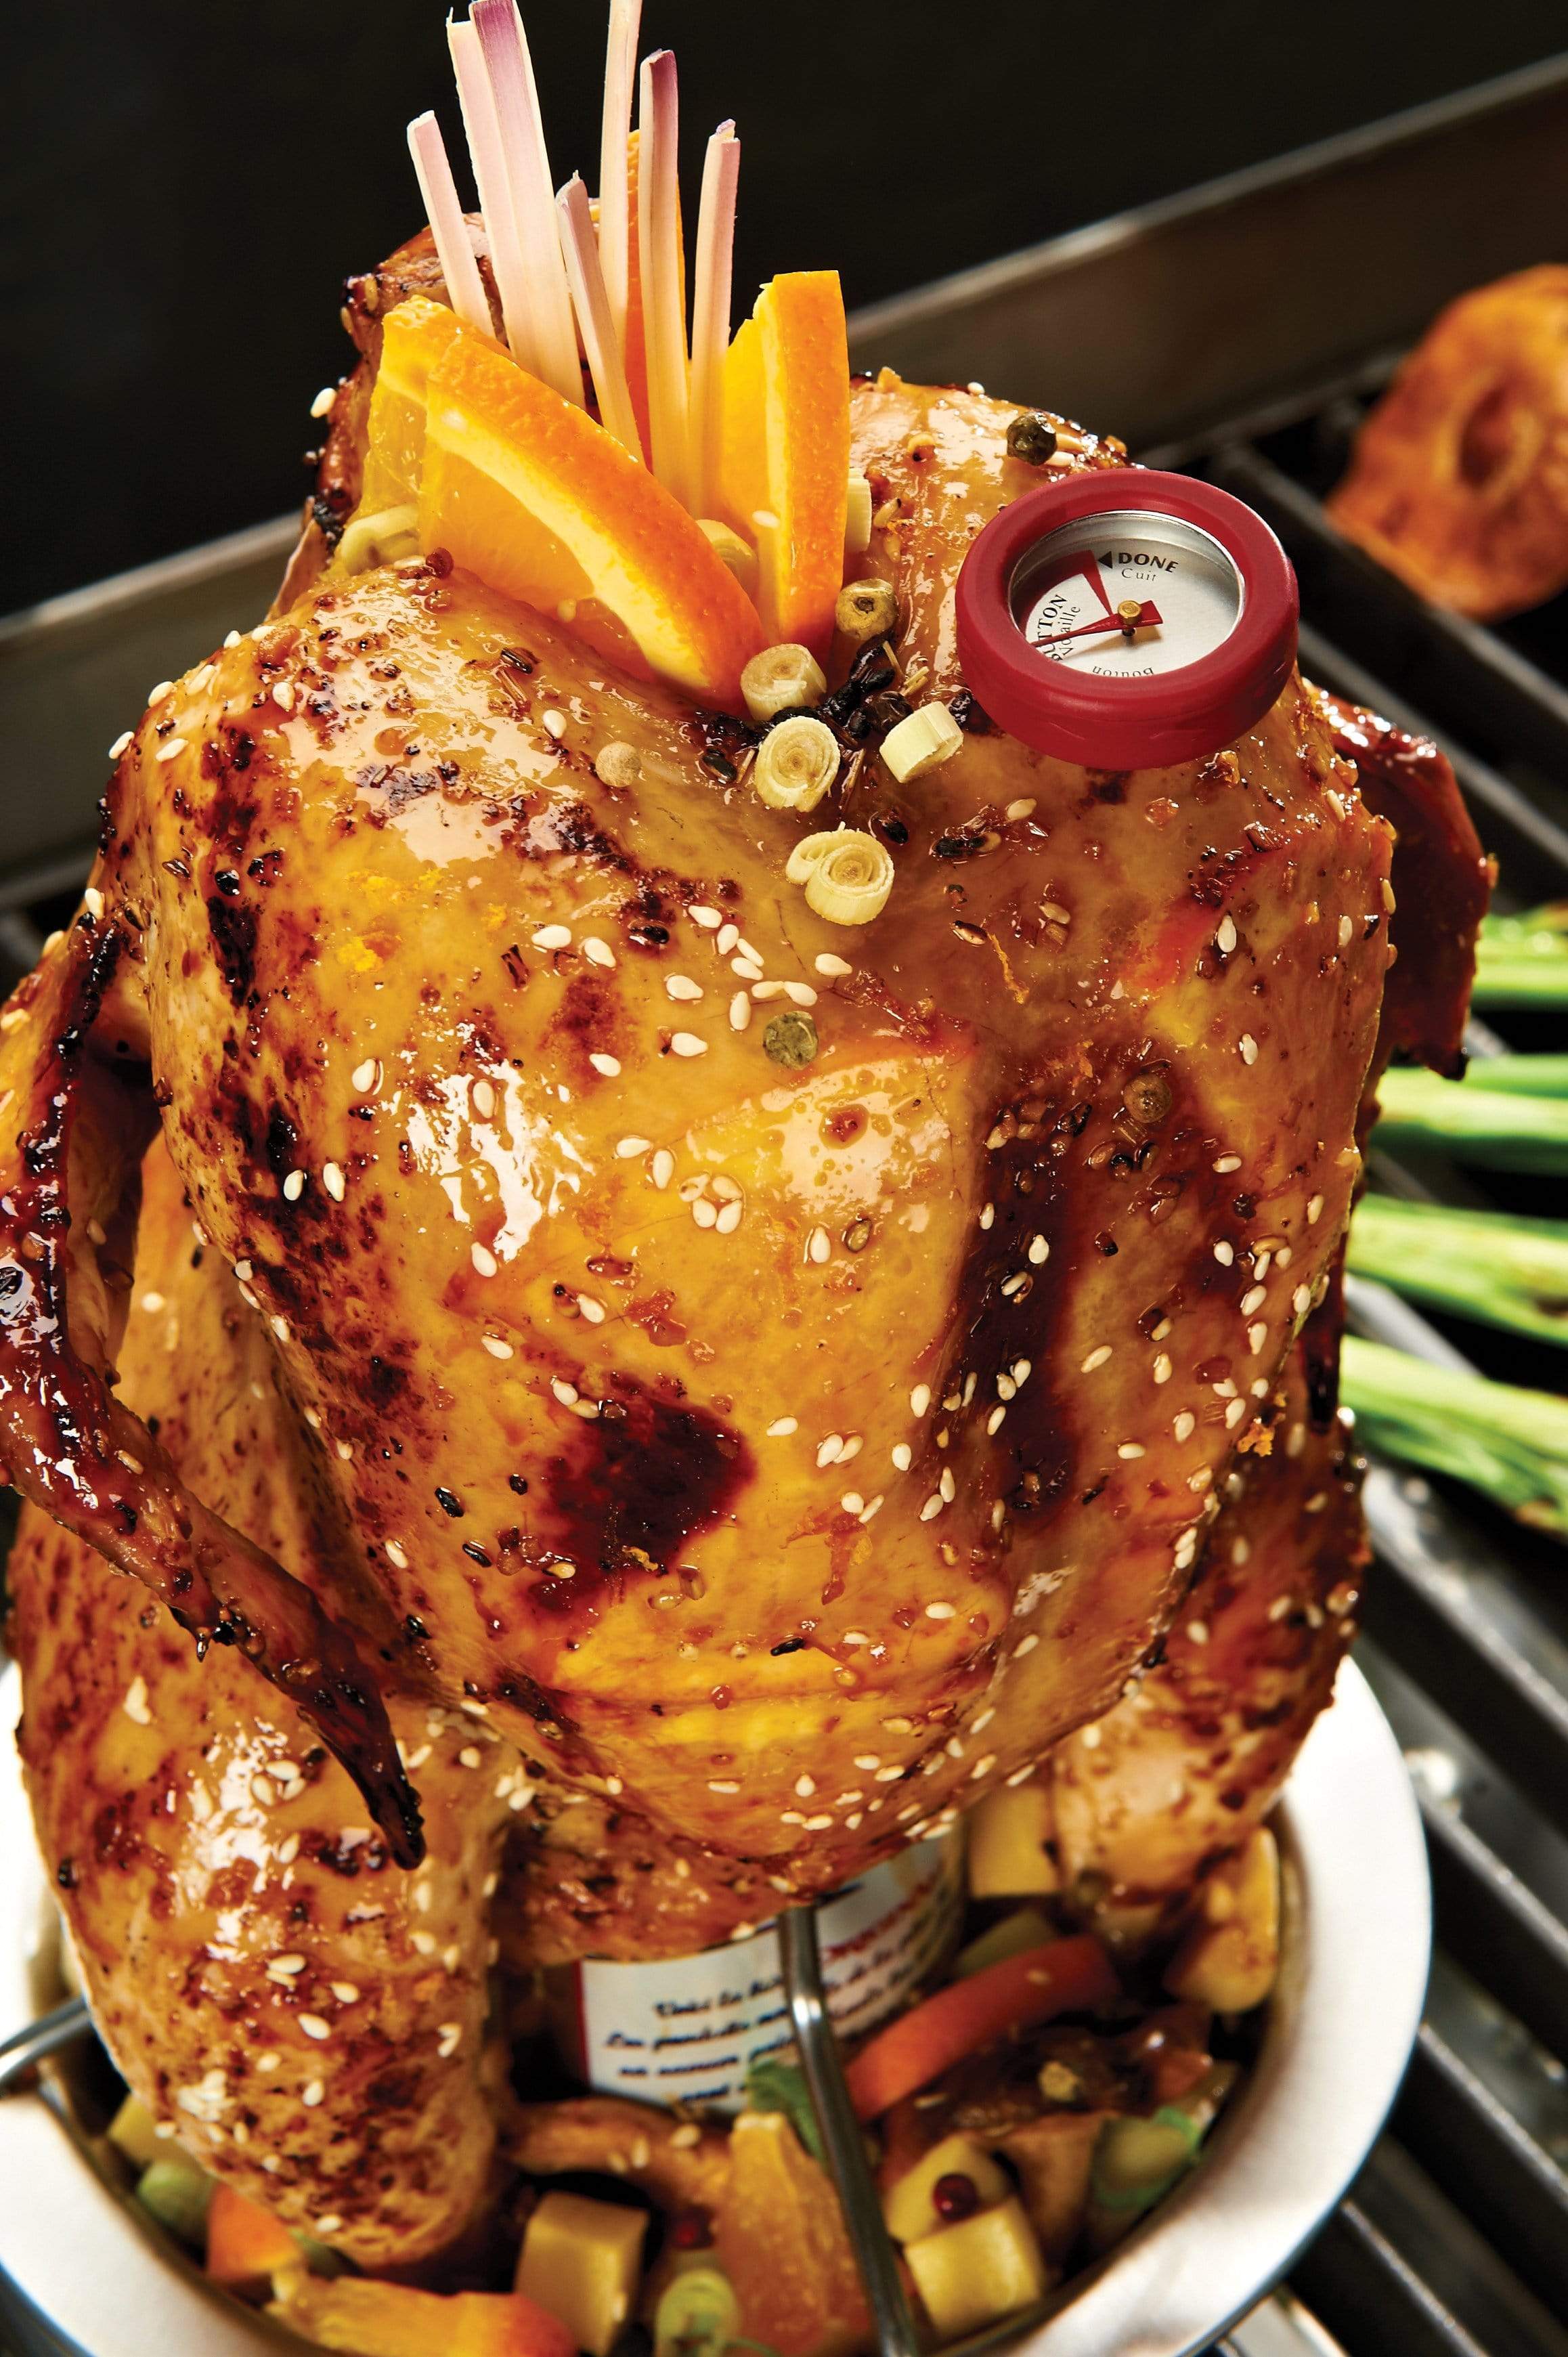 Broil King Broil King Accessories ROASTER - CHICKEN - SS